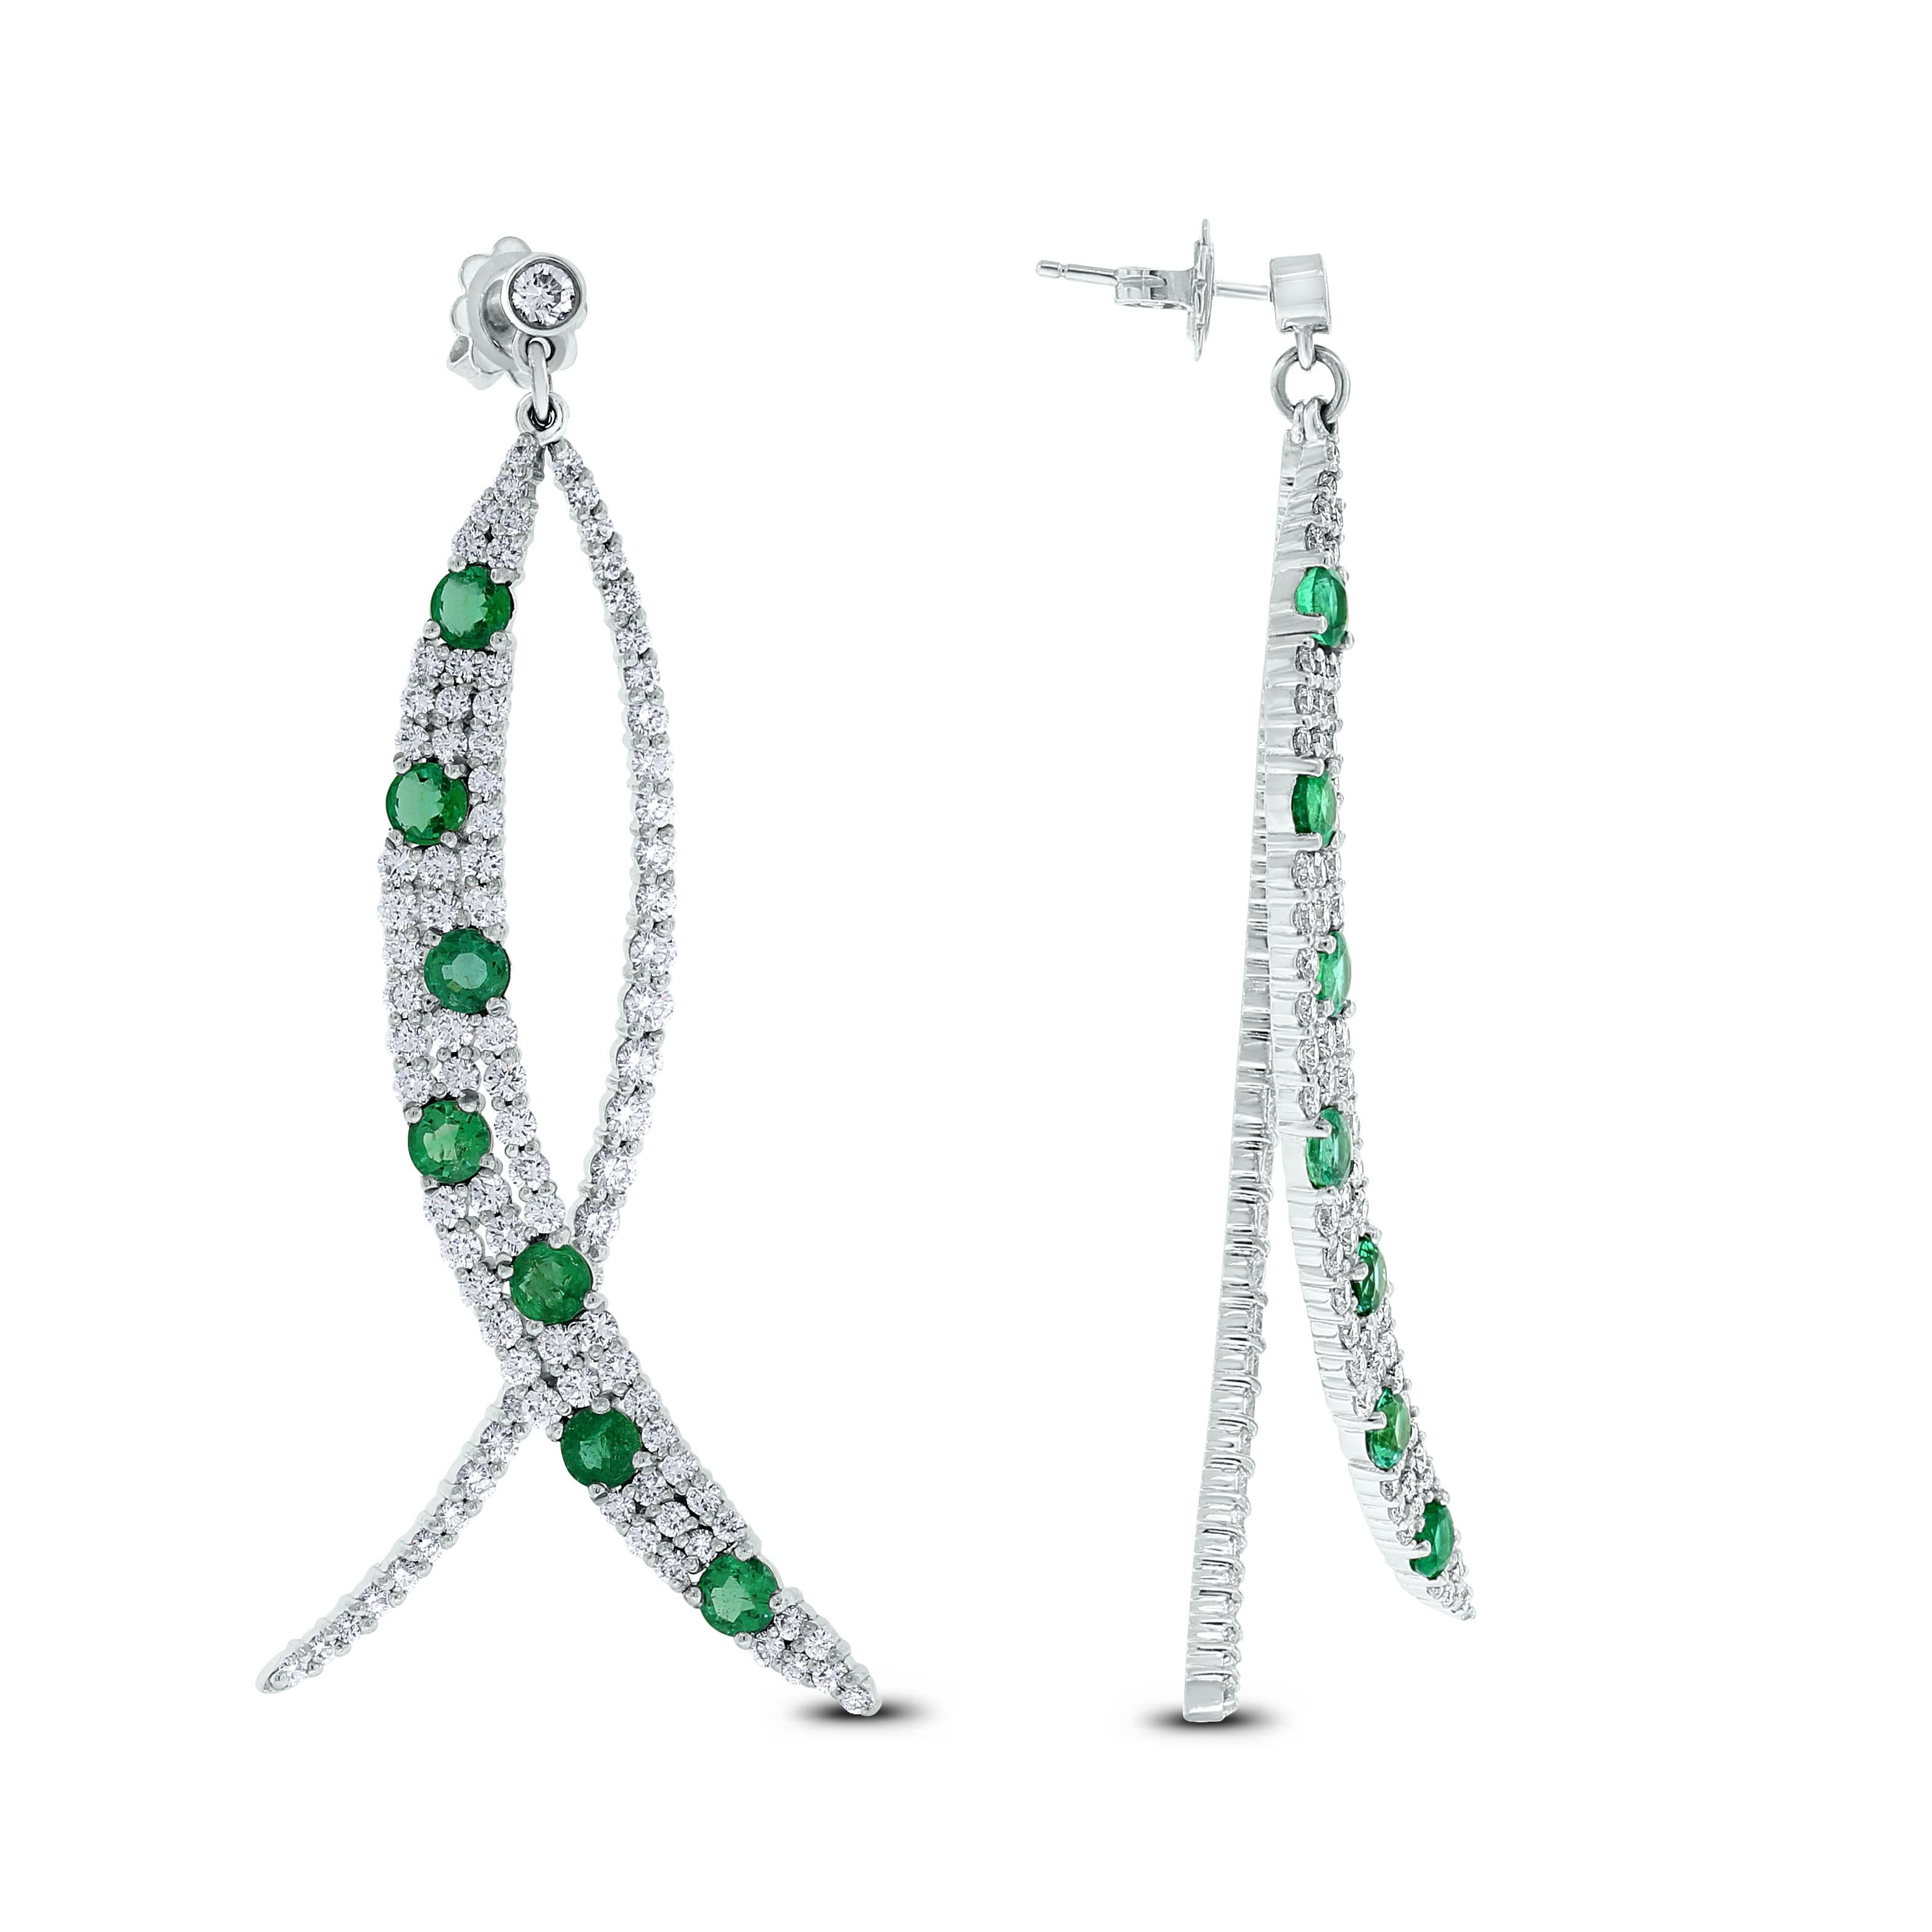 The Beauvince Olive dangling earrings are everything long, slender and chic. With glamorous diamonds and emeralds, they are full of fun and frolic. 

Gemstones Type: Emeralds 
Gemstones Shape: Round 
Gemstones Weight: 3.07 
Gemstones Color: Green